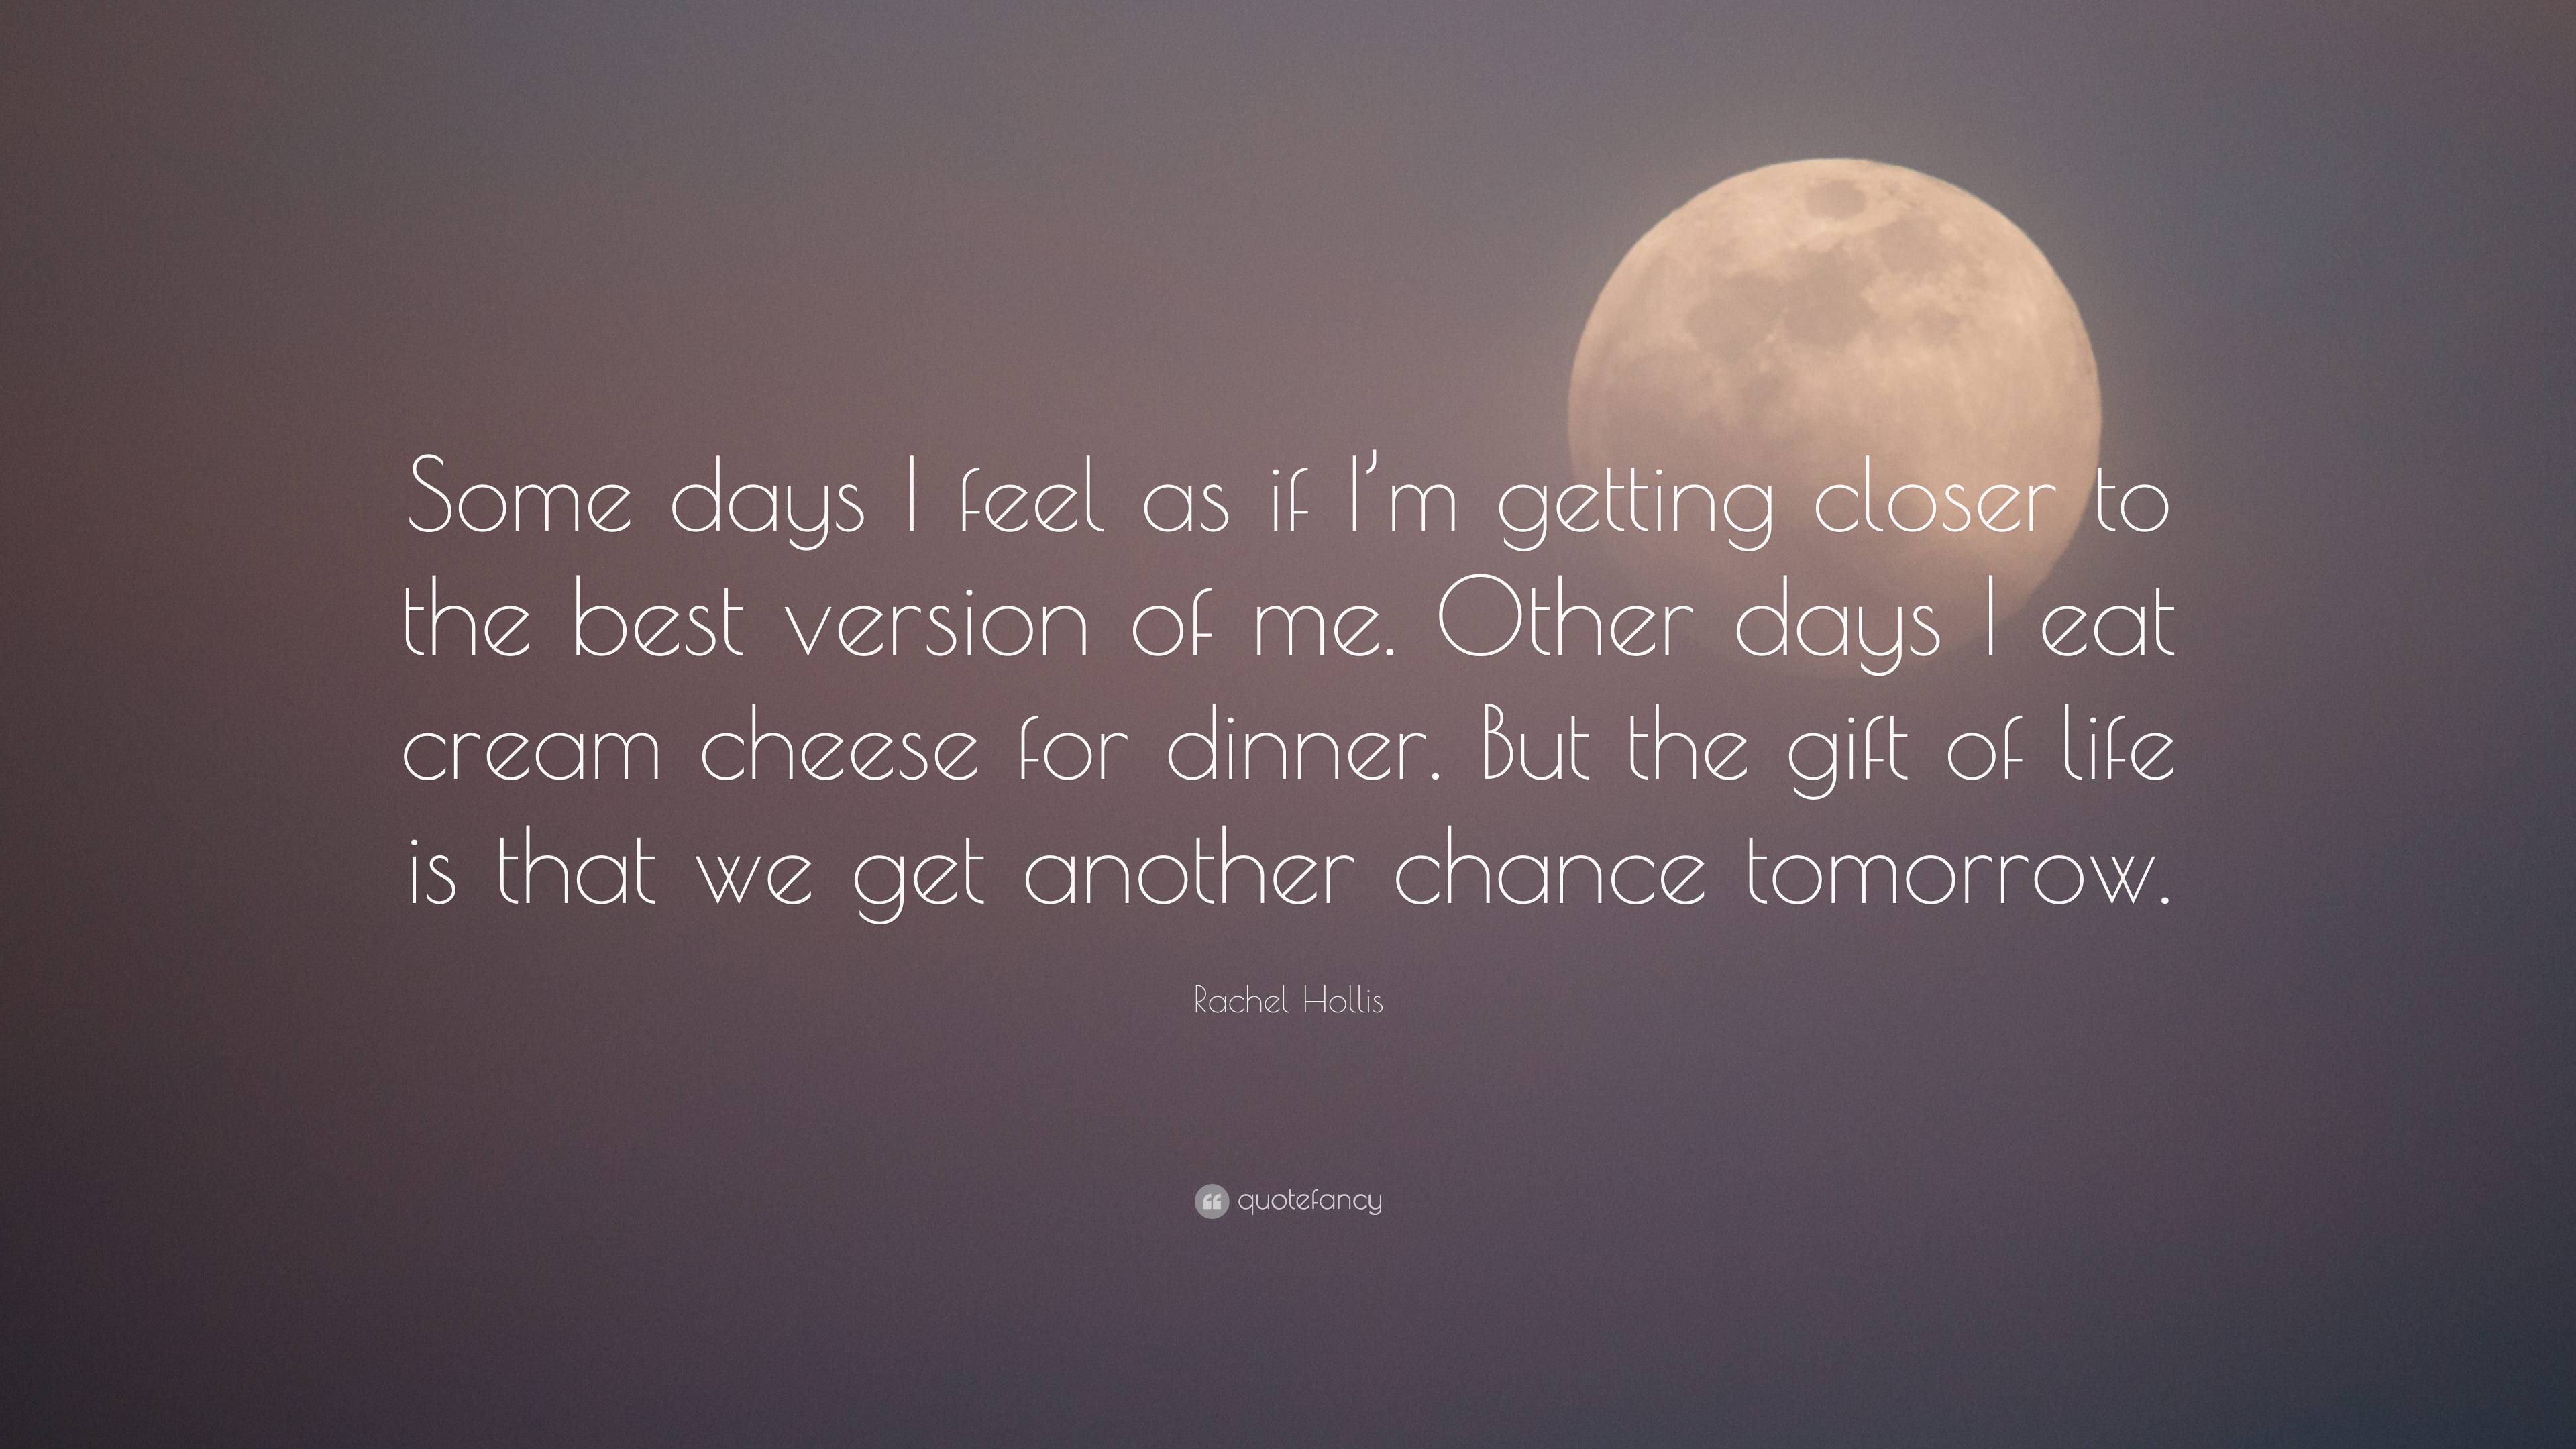 Rachel Hollis Quote: “Some days I feel as if I'm getting closer to